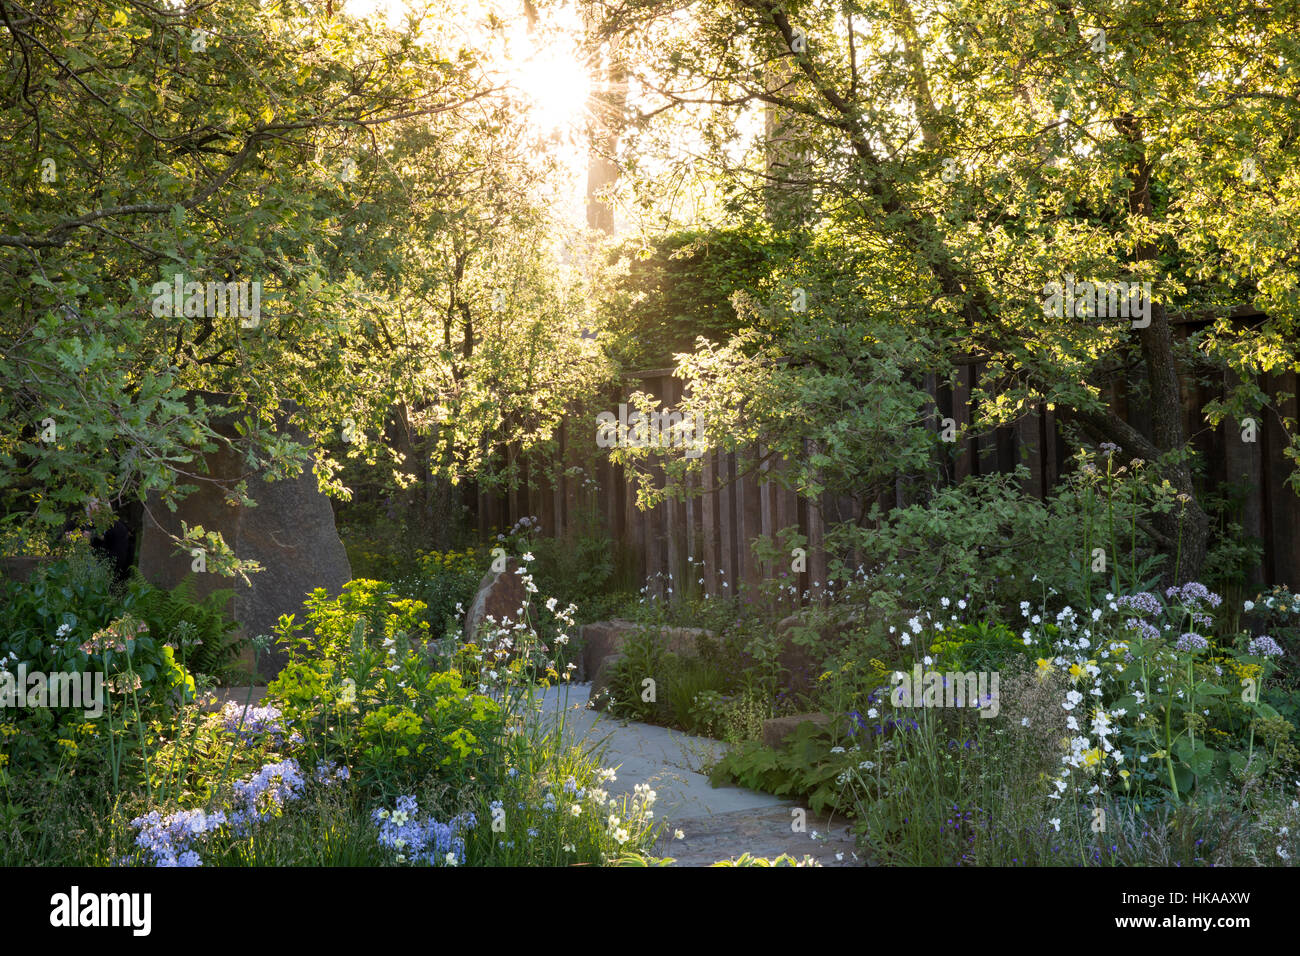 English Cottage garden in Spring UK with garden stone paved paving path and  bird bath sunbeam through trees mixed garden borders planting Stock Photo